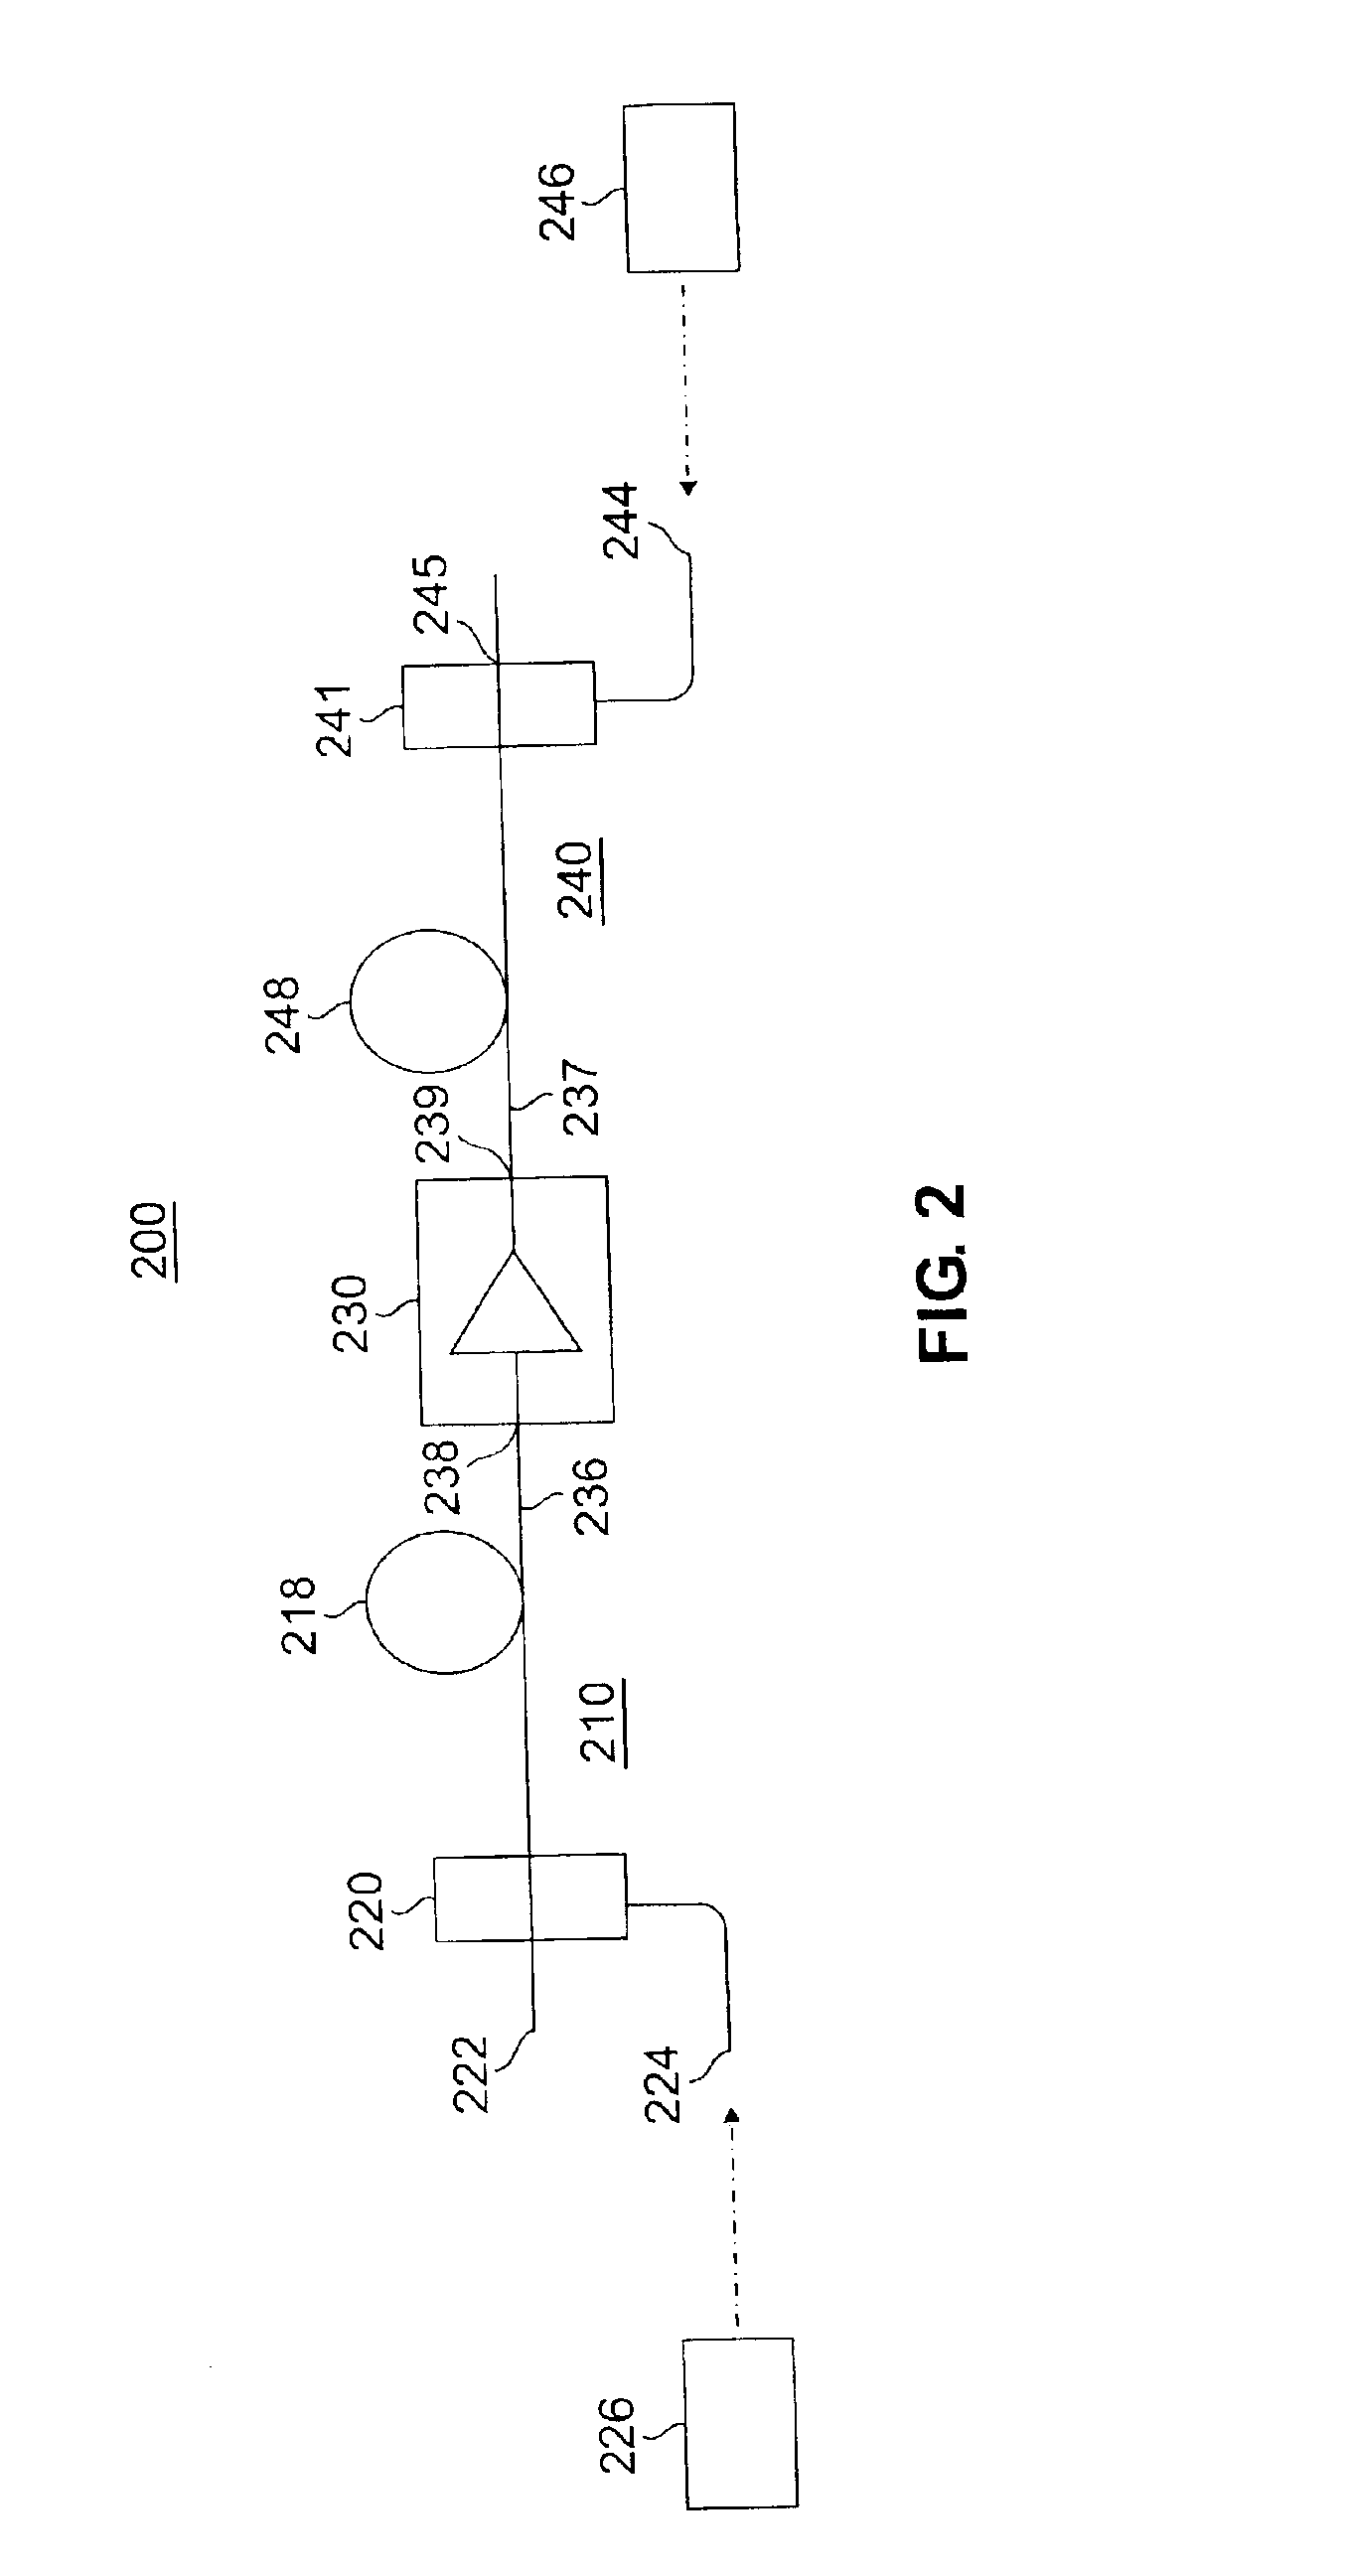 Multistage optical amplifier having a fiber-based amplifier stage and a planar waveguide-based amplifier stage